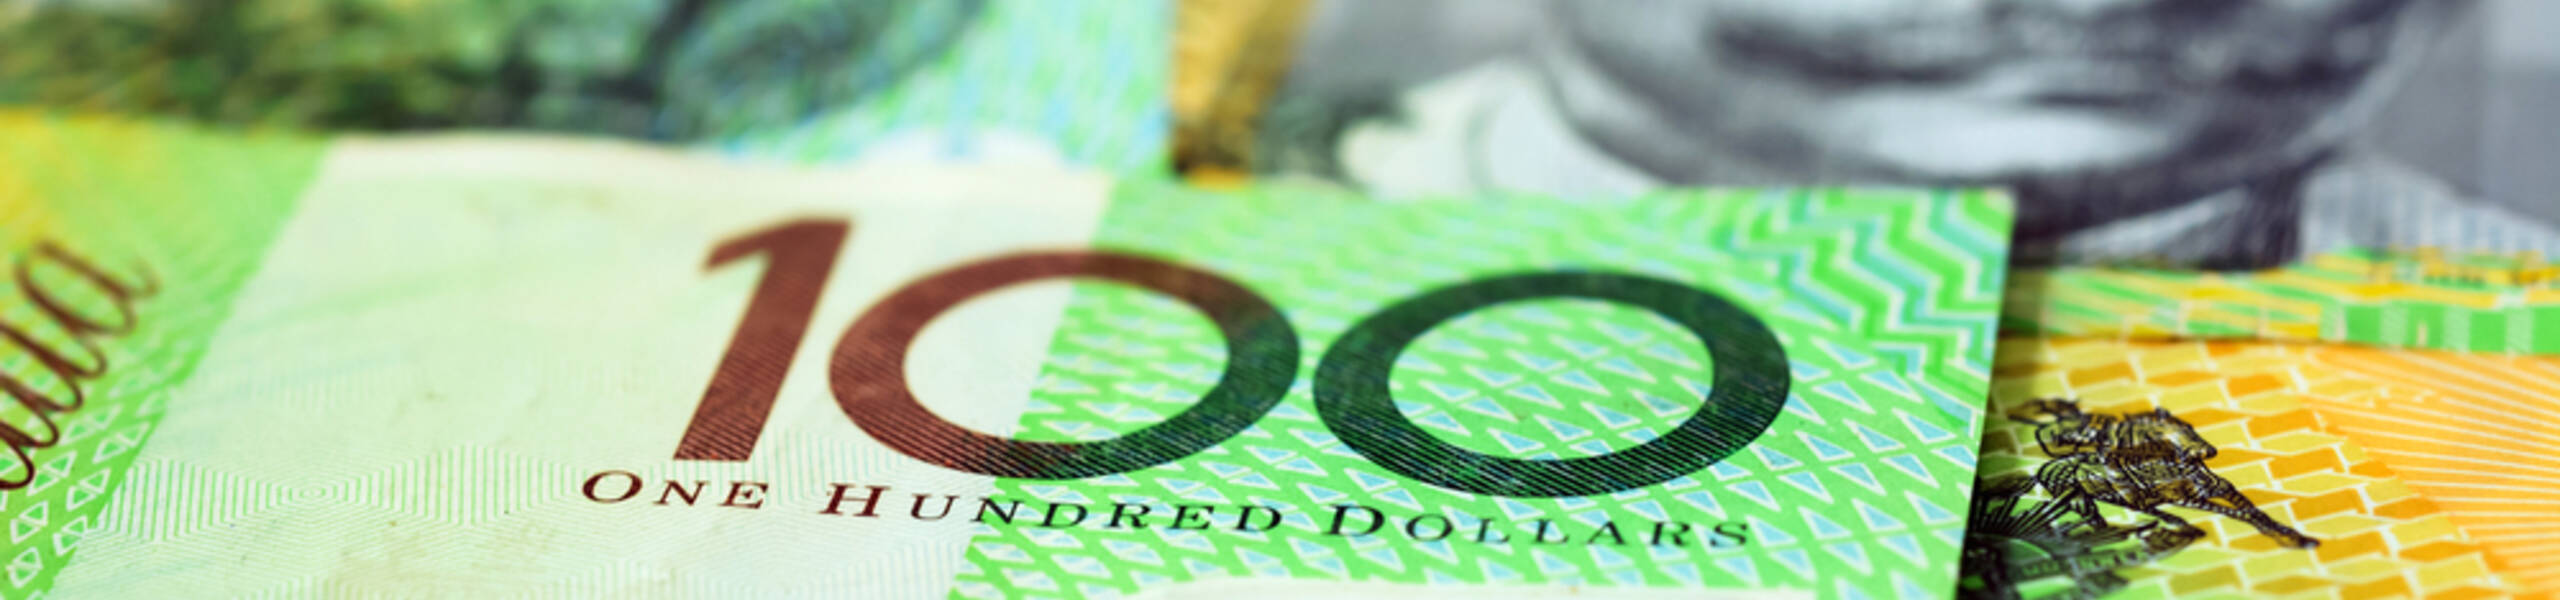 AUD/USD: a bet on the stronger greenback